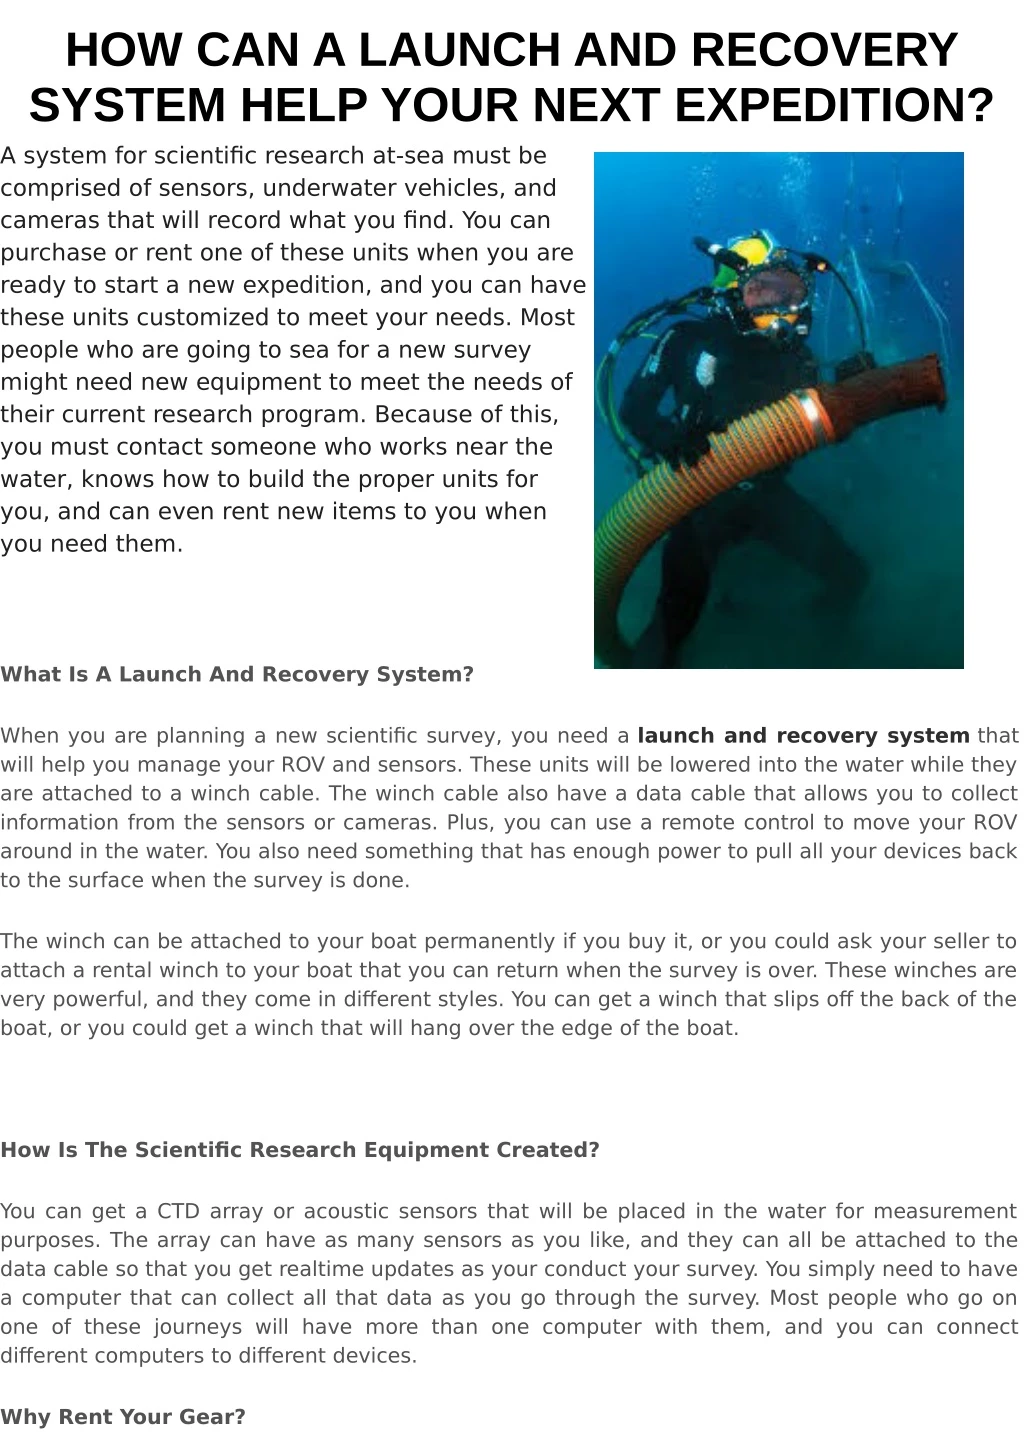 how can a launch and recovery system help your